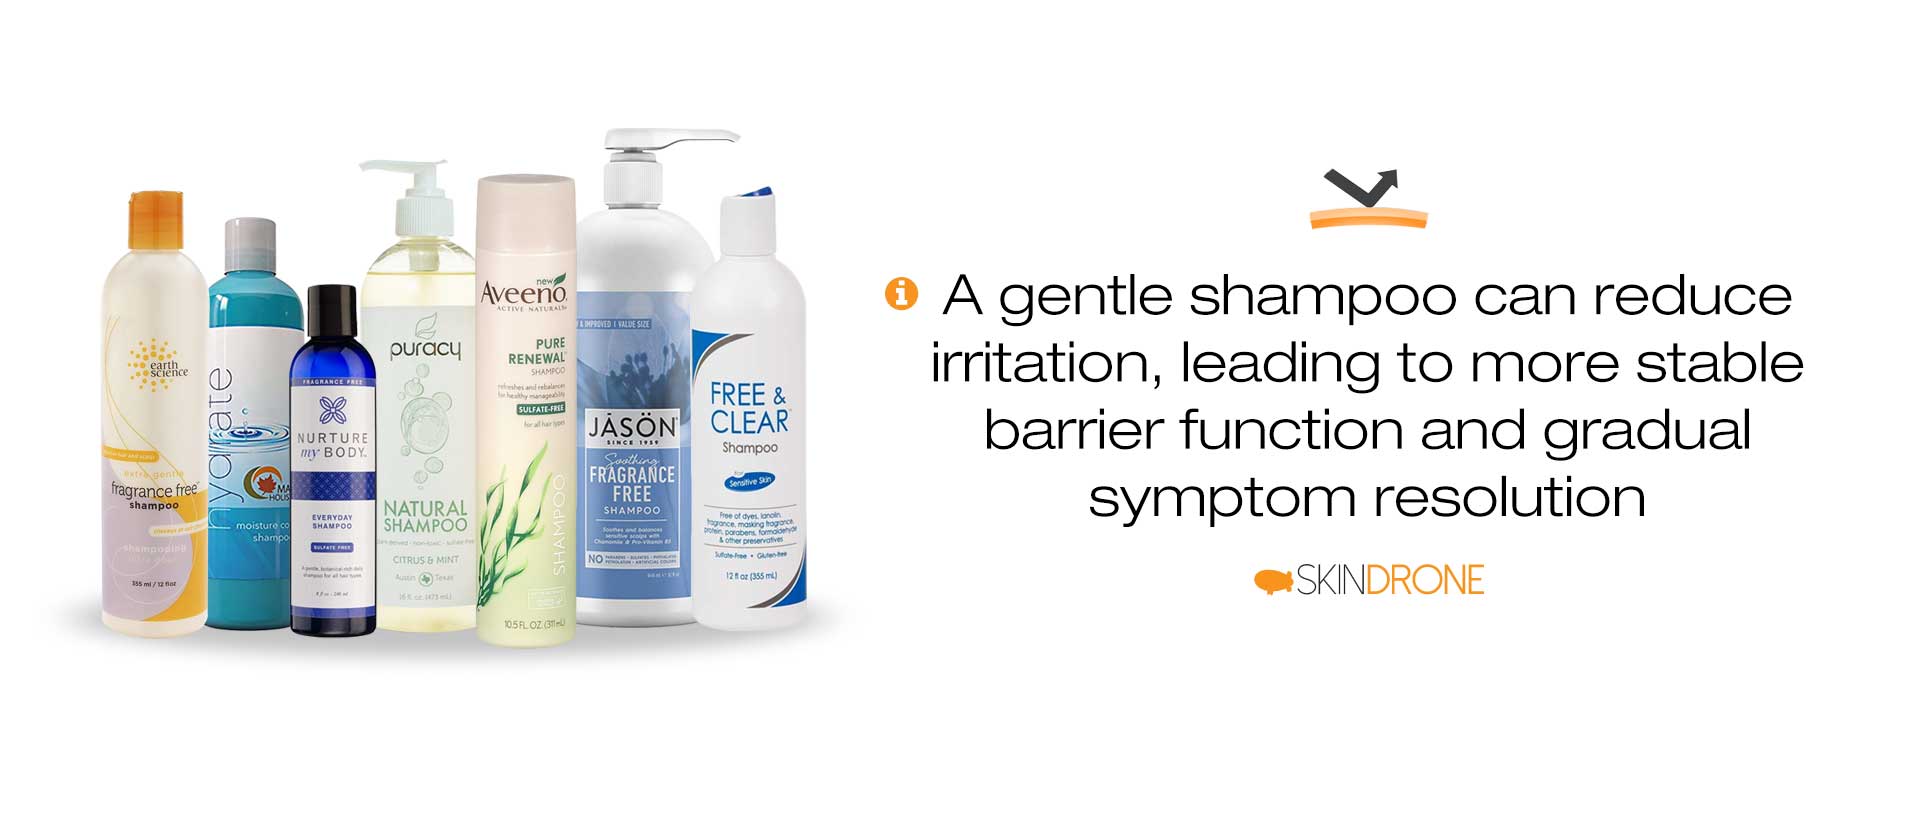 Switching to a gentle shampoo may eliminate a source of microinflamattion; leading to stable barrier function and gradual remission of symptoms